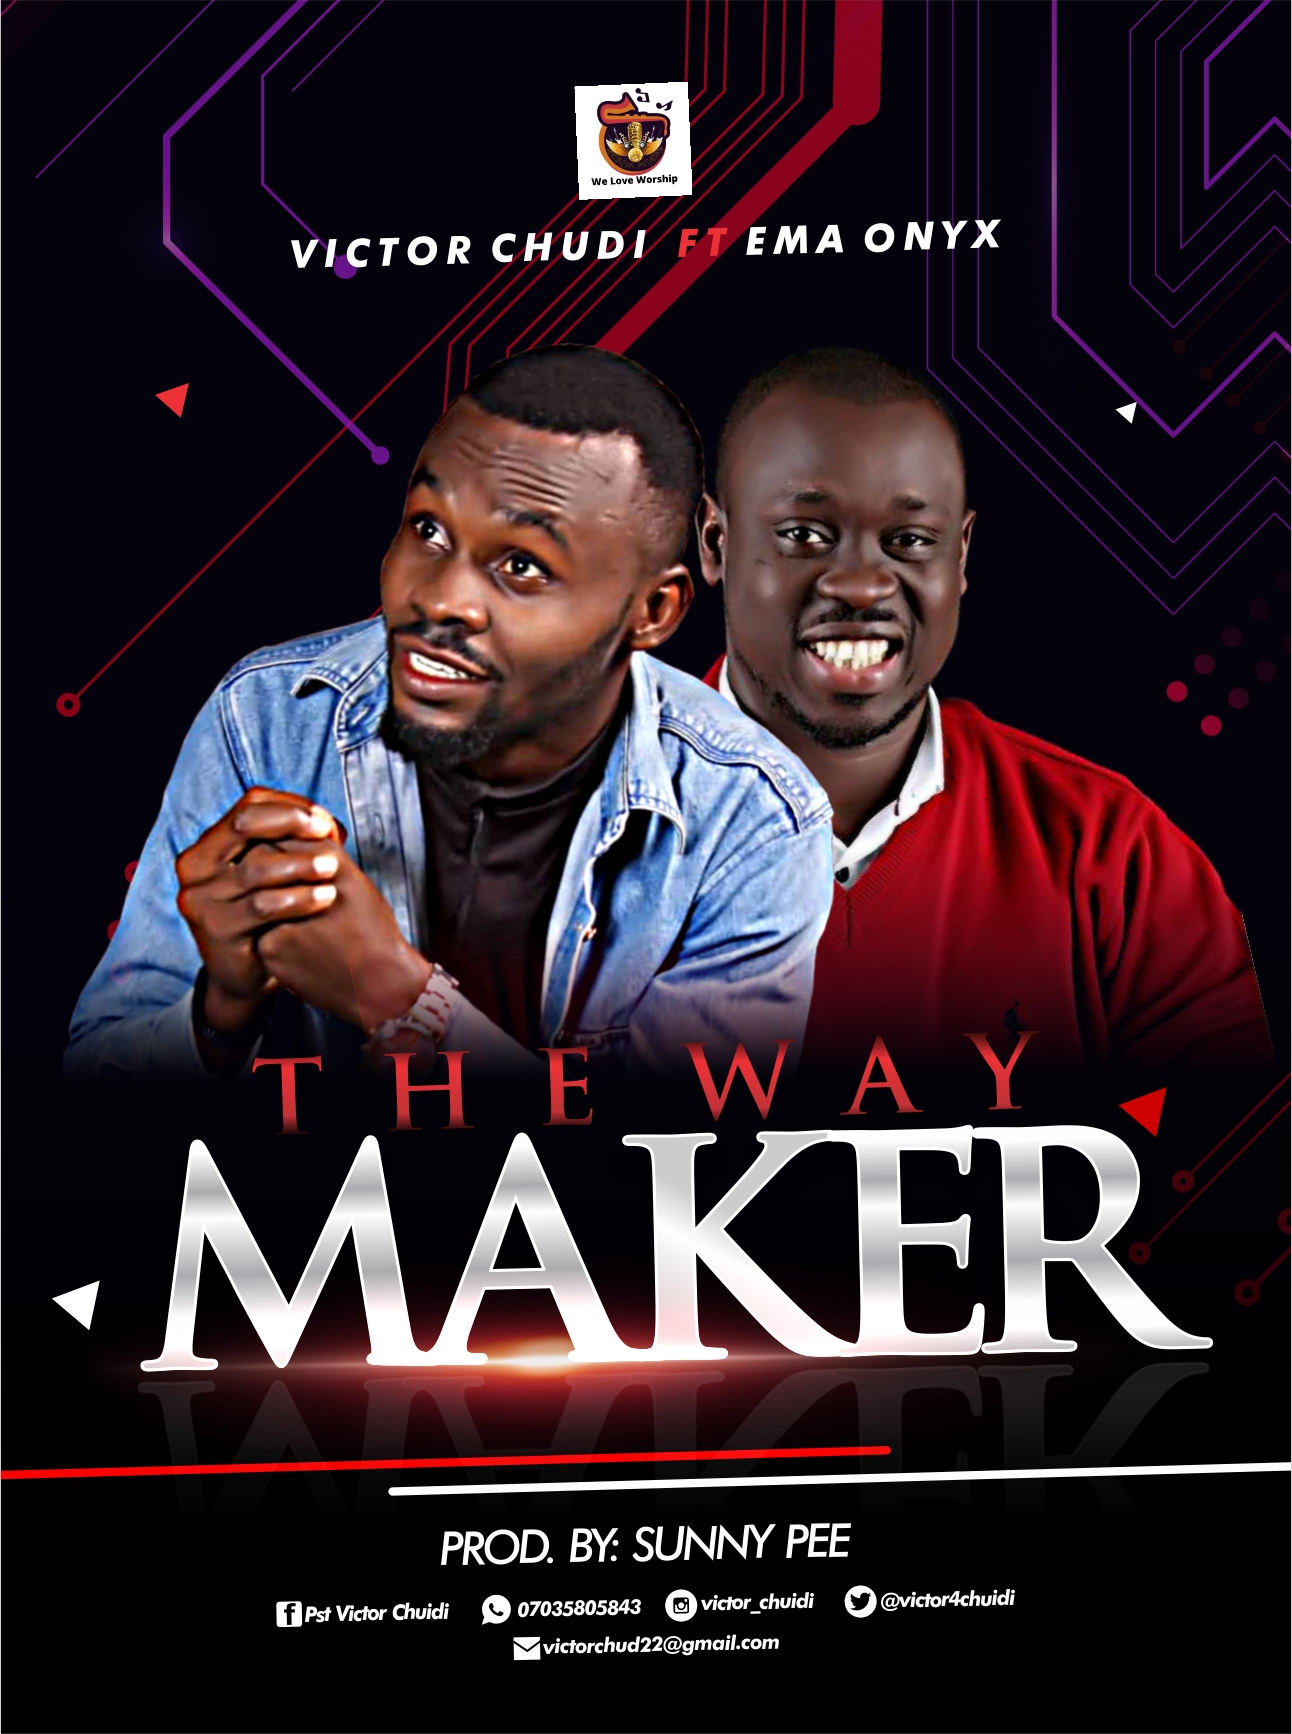 Download THE WAY MAKER by Victor Chudi (MP3 SONG) 16